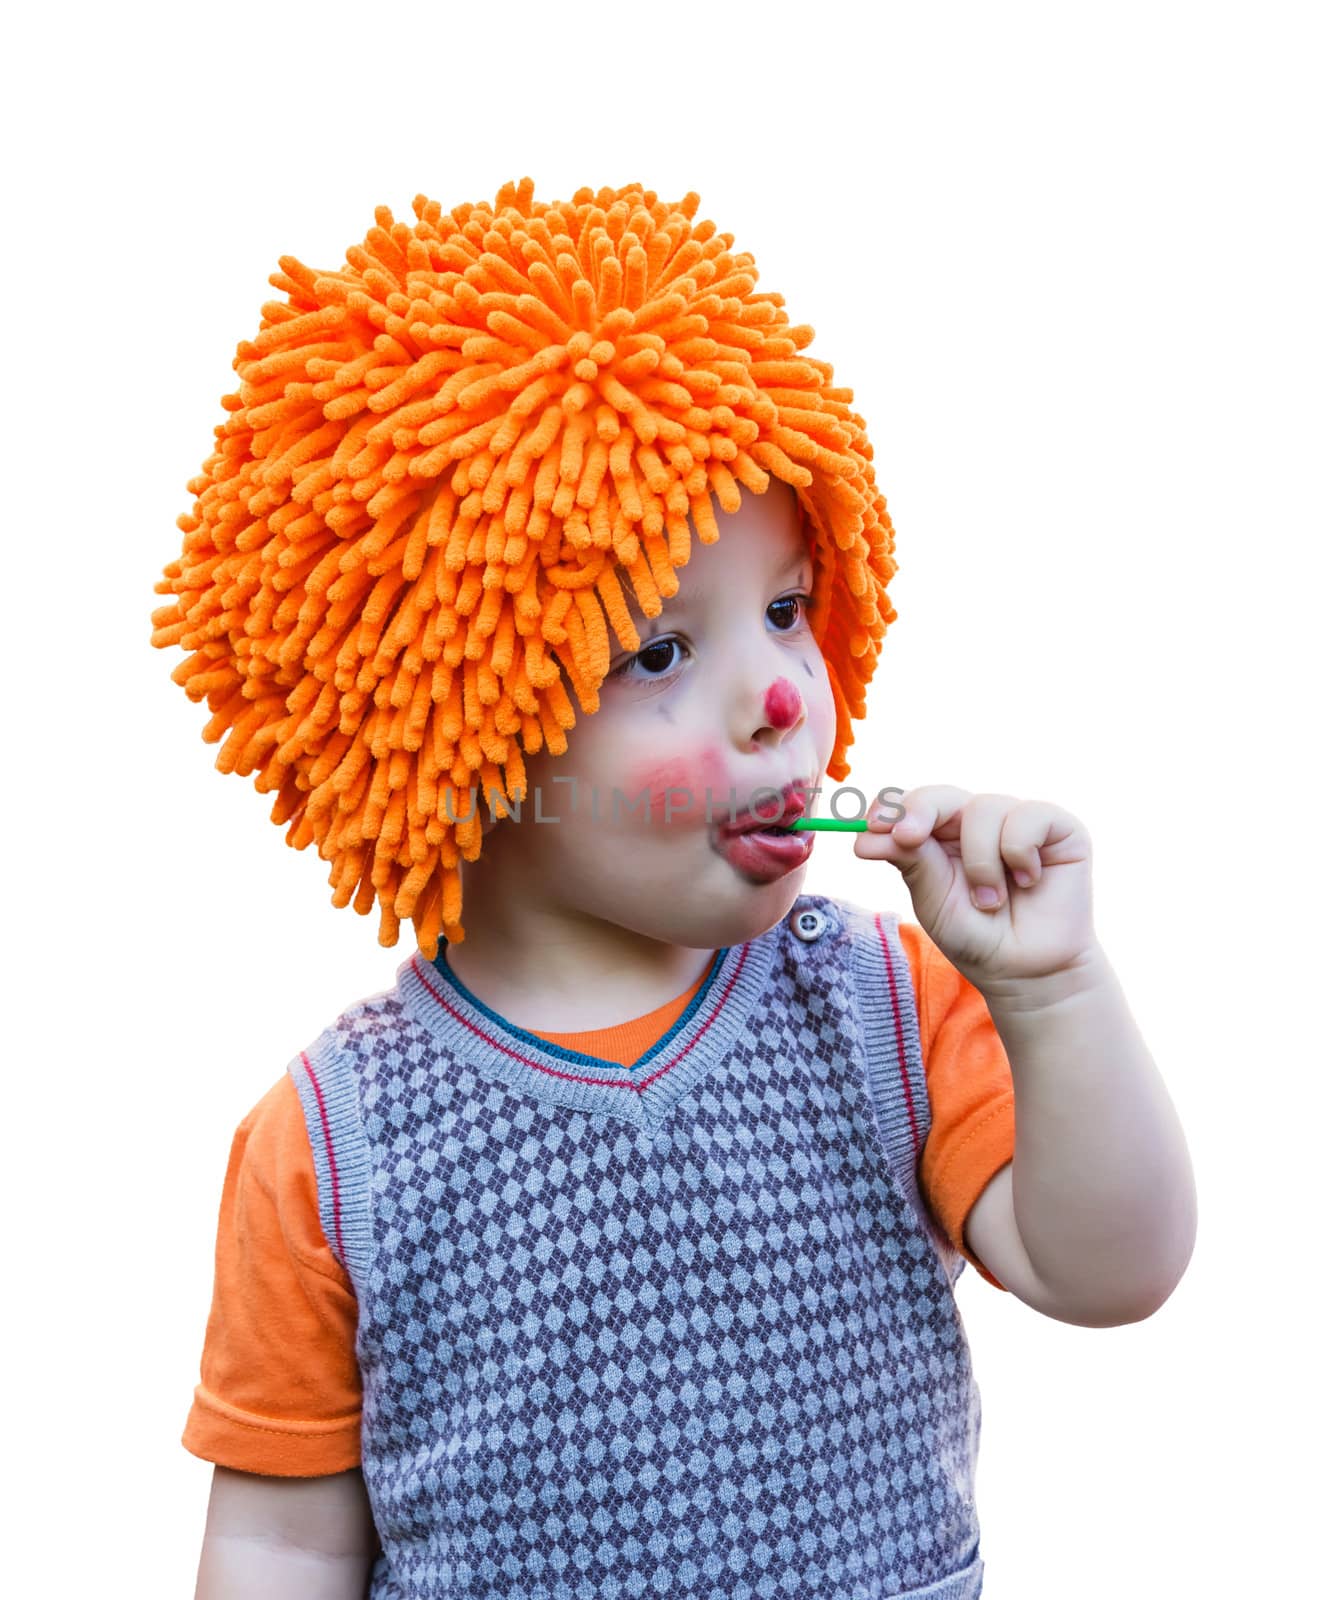 Clown child eating a lollipop on white background by doble.d